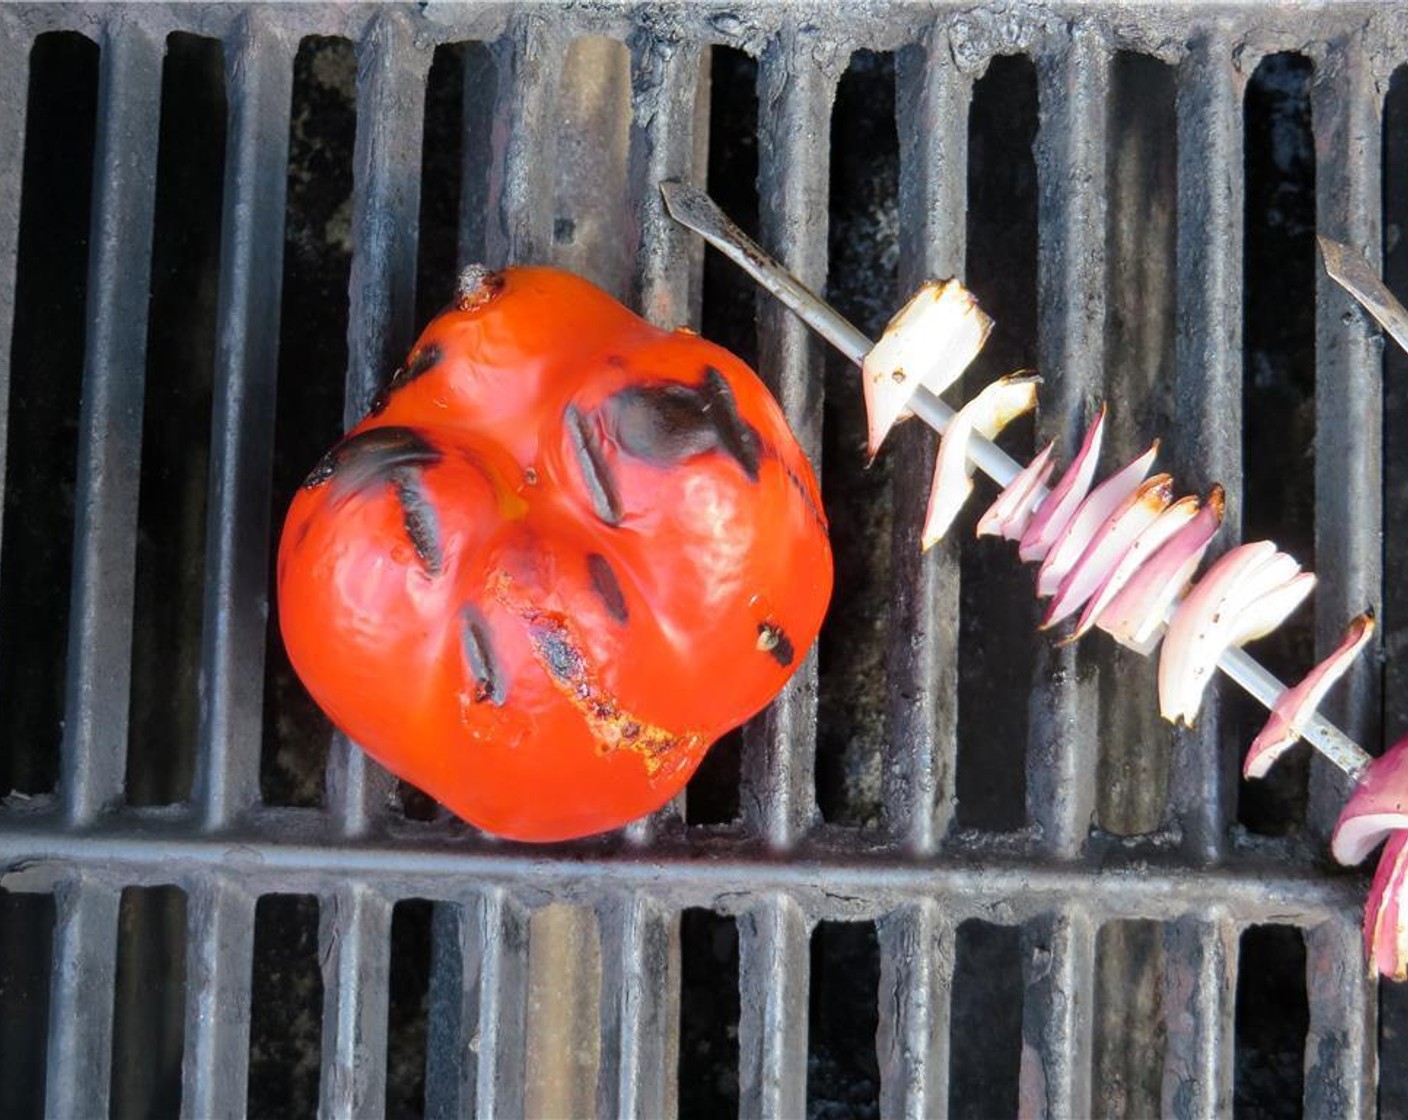 step 4 Place the Red Bell Pepper (1) directly on the grates and cook until well charred. If using an oven, heat it to 450 degrees F (230 degrees C), and place the red pepper in the oven and cook for 30 minutes or until tender.